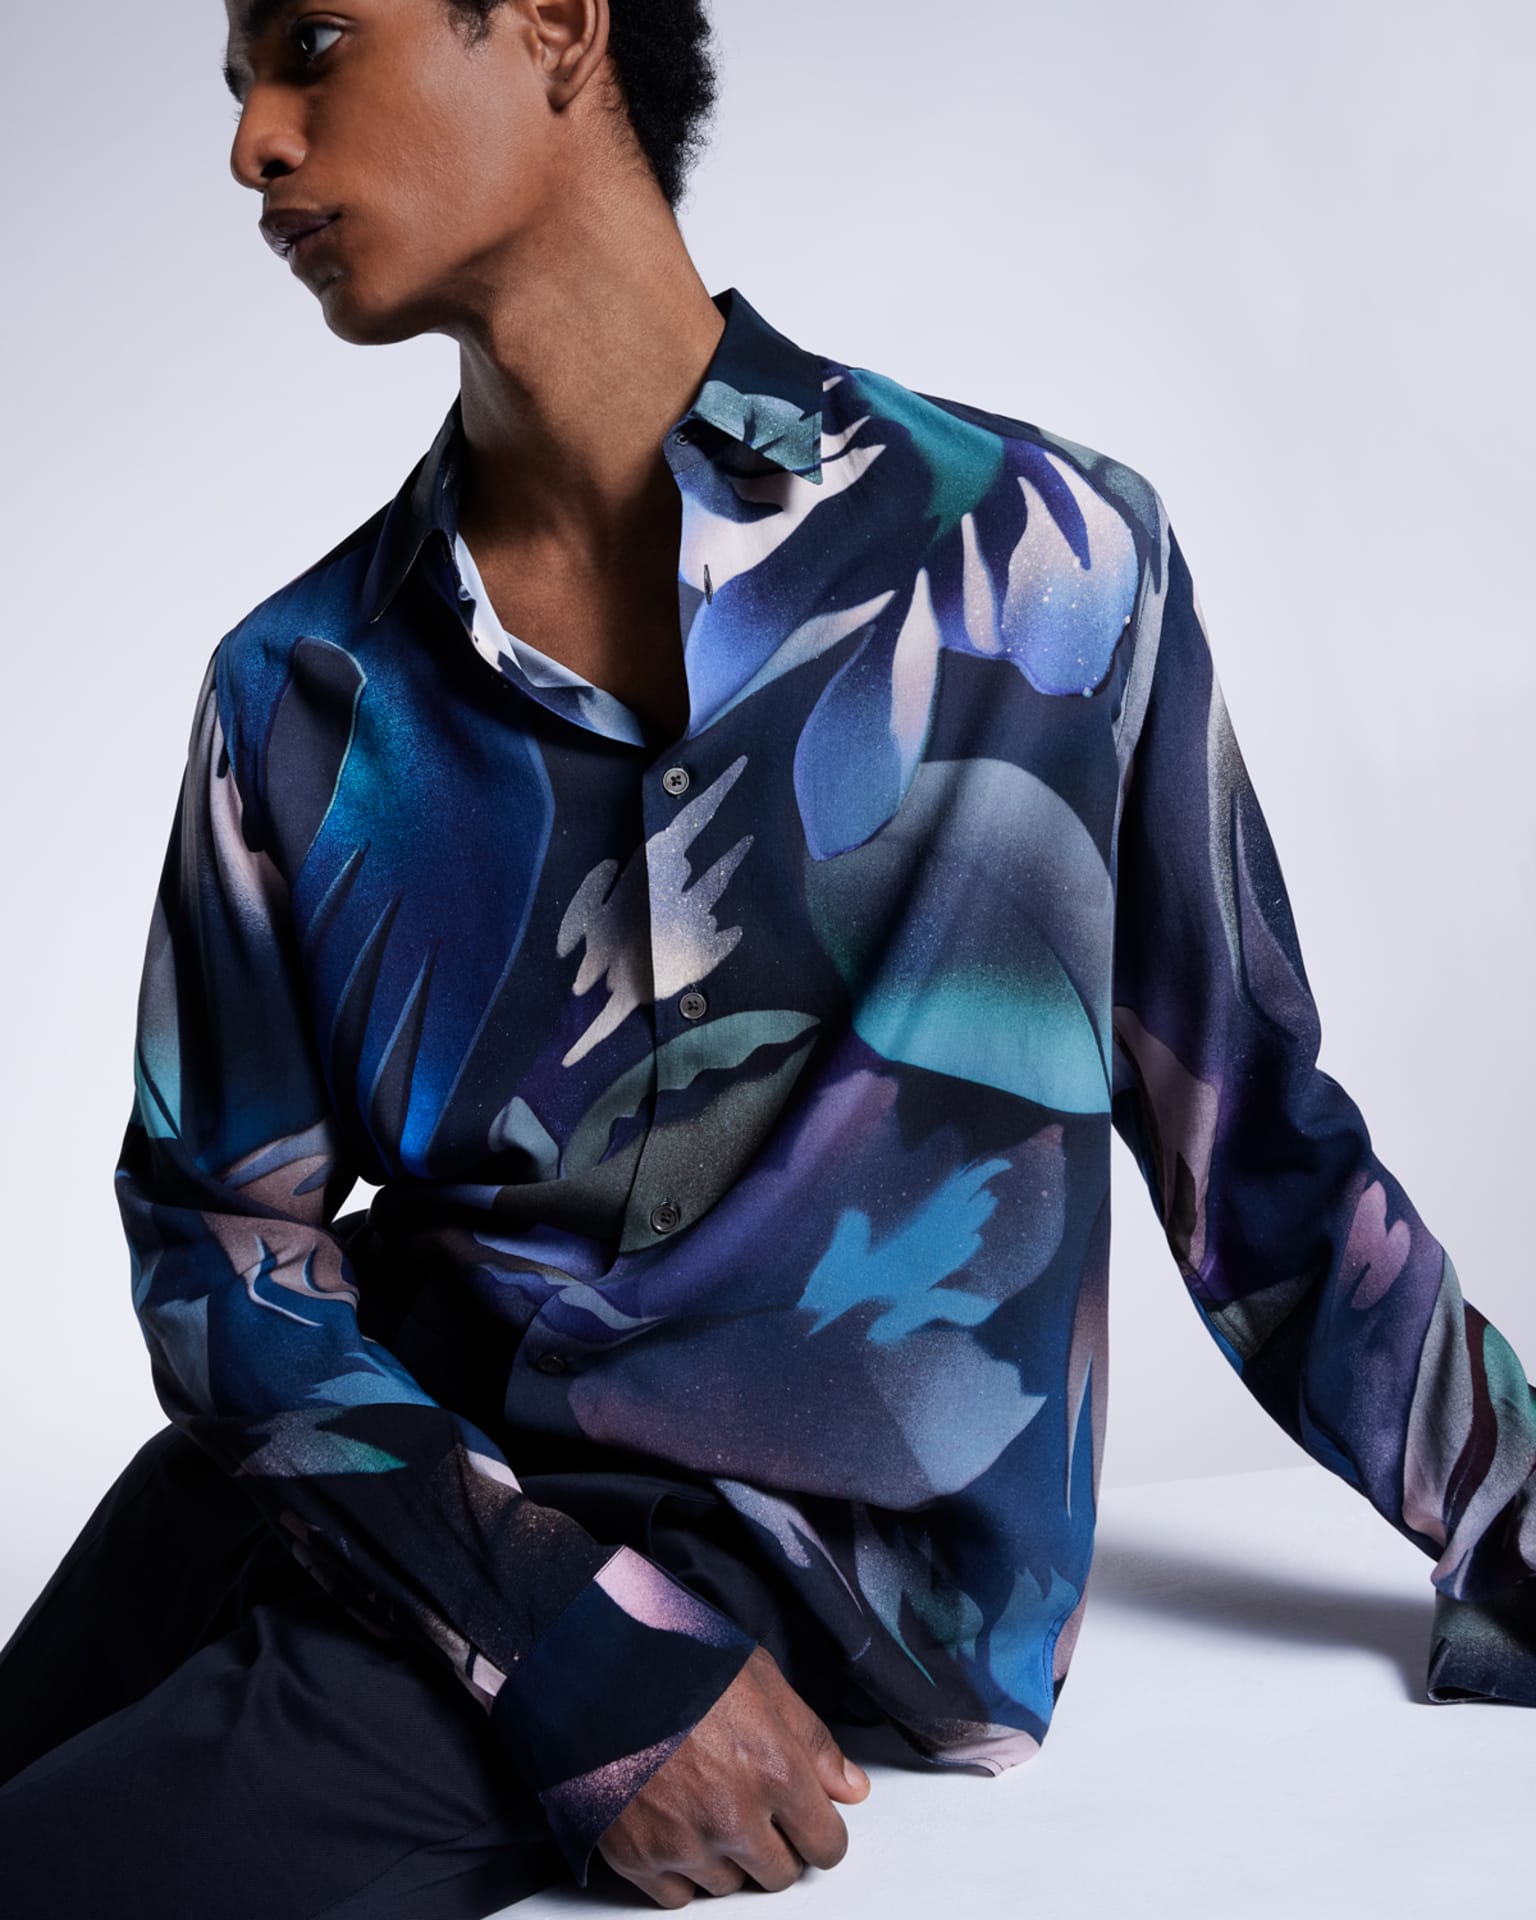 a male model sat on a white box wearing a colourful patterned statement shirt in blue, purple and green tones